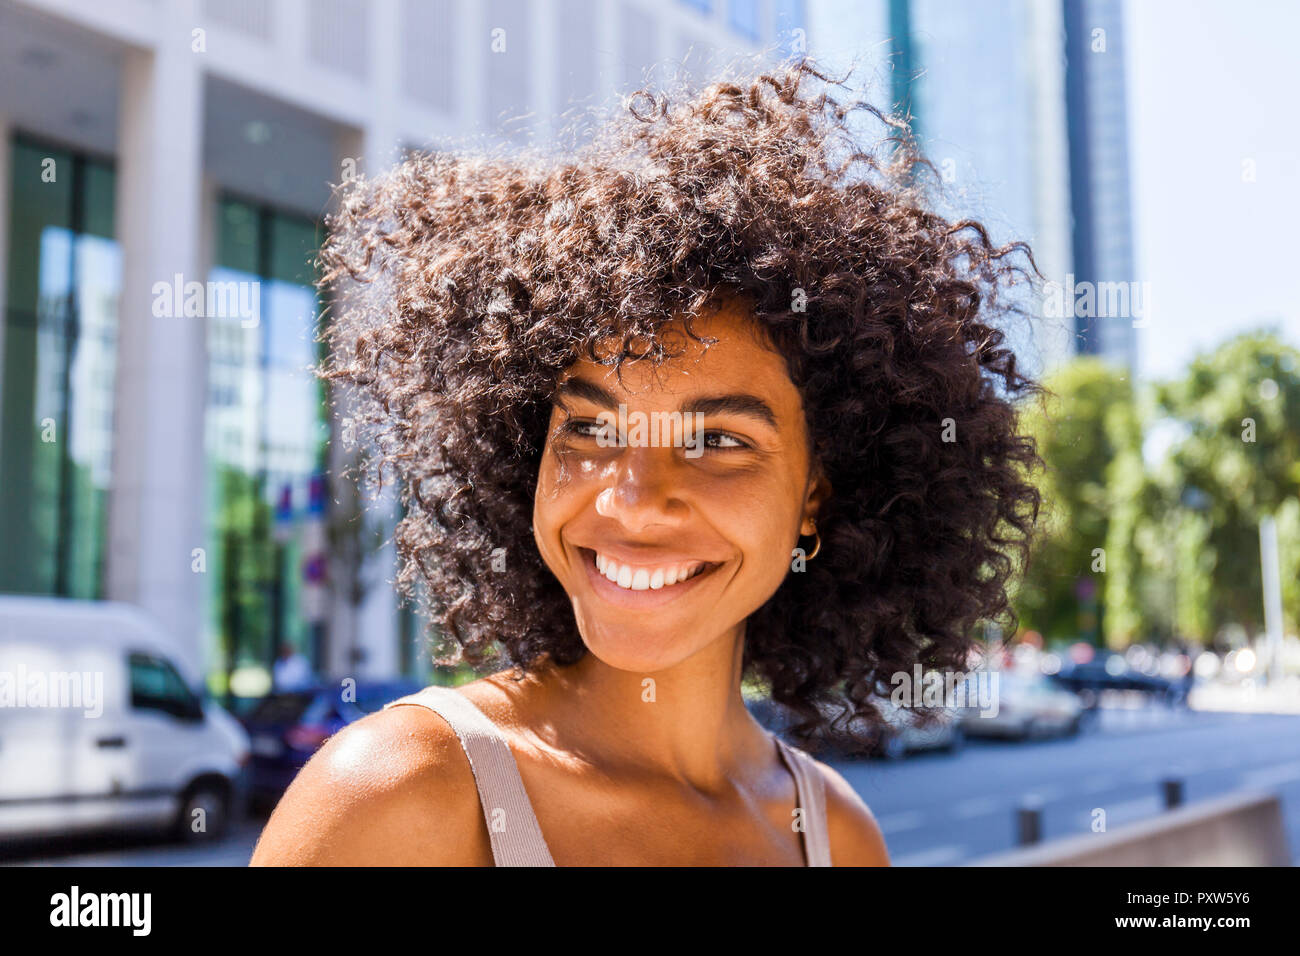 Germany, Frankfurt, portrait of laughing young woman with curly hair Stock Photo